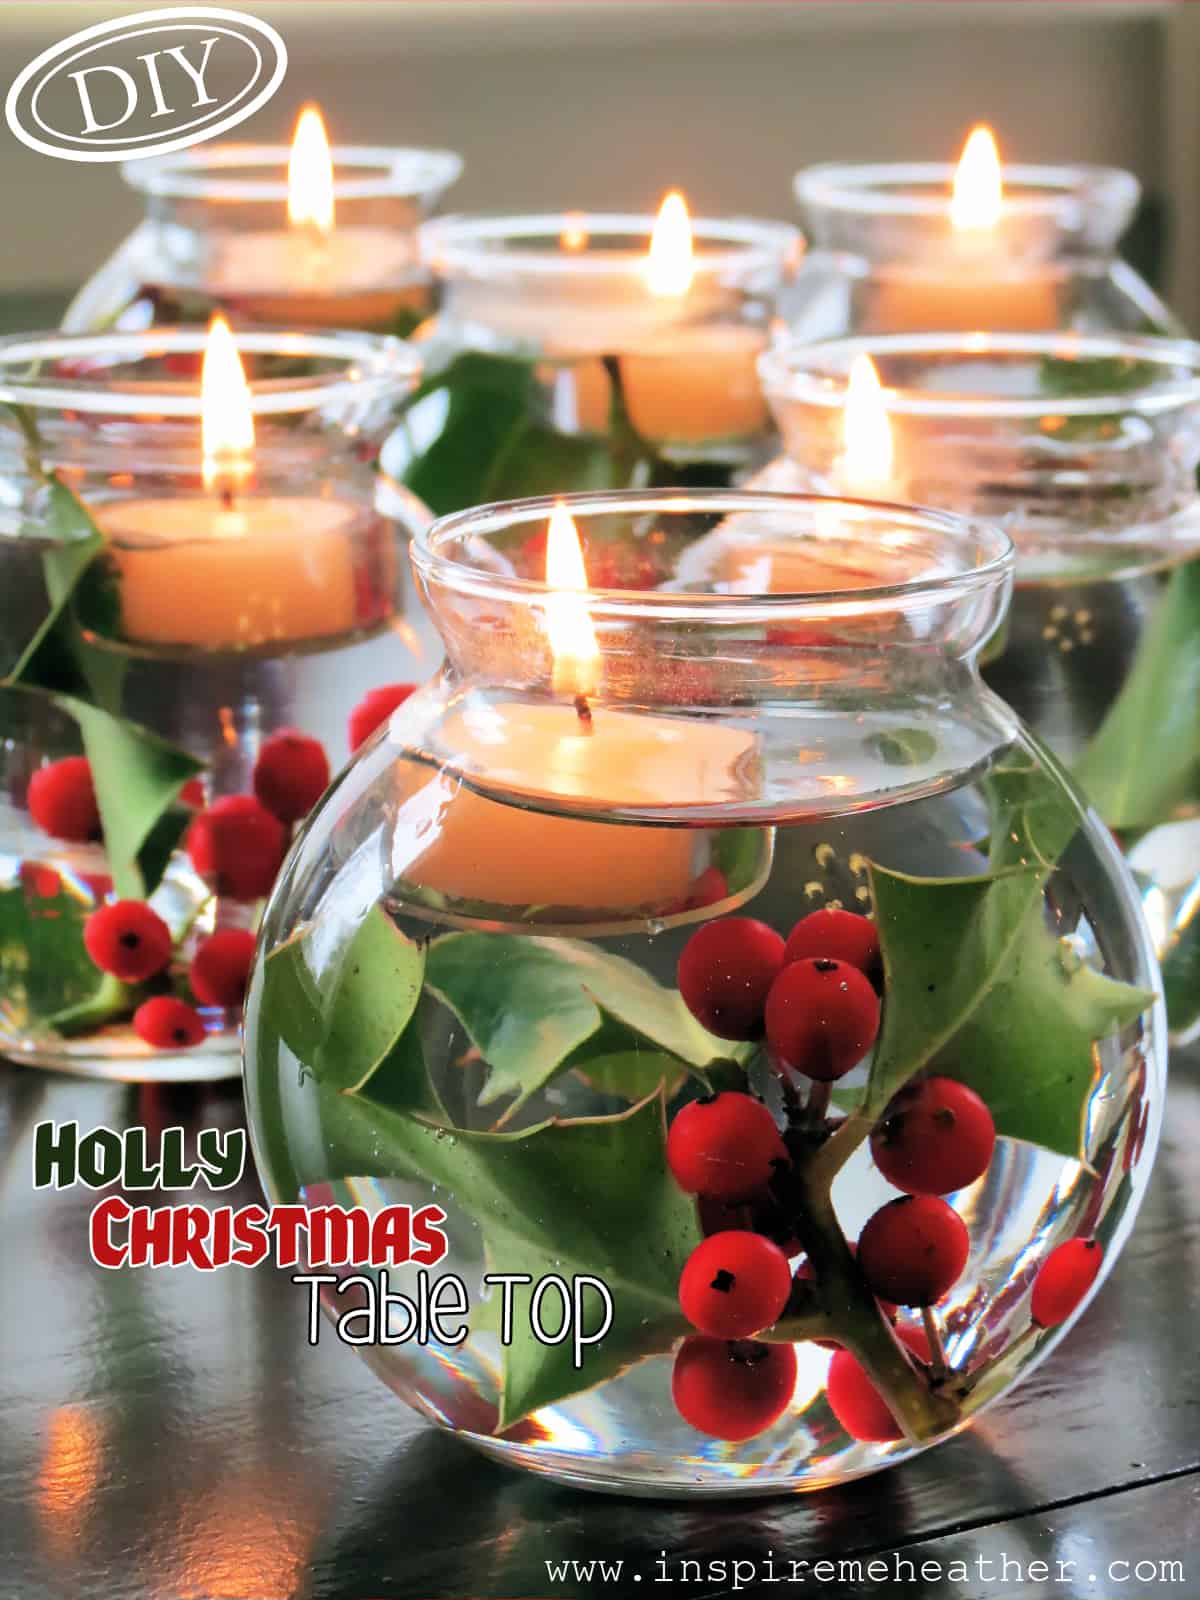 Floating candle and holly centrepiece